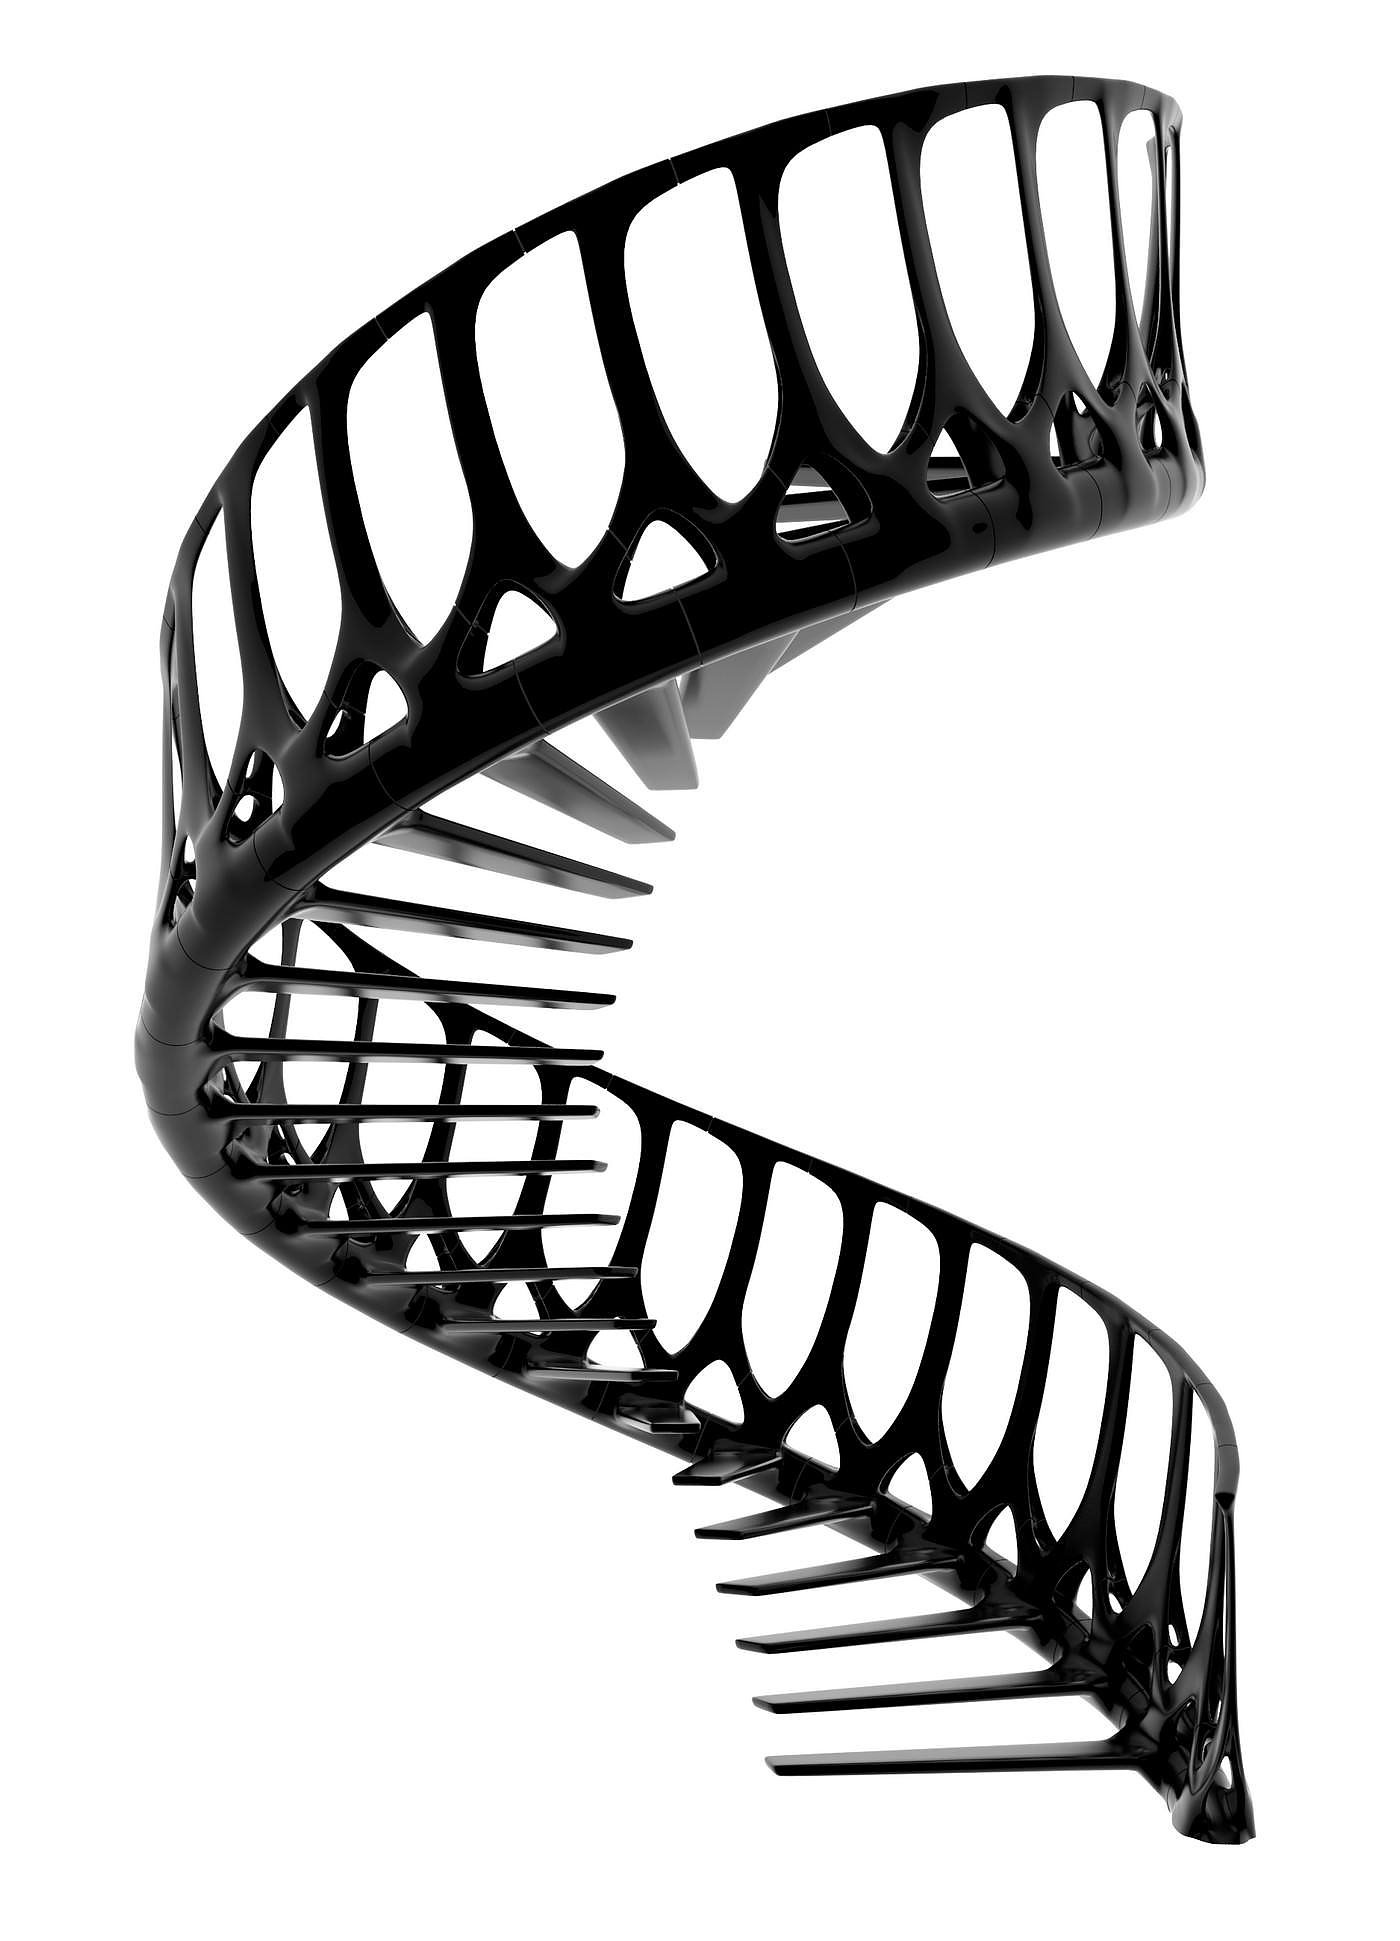 Vertebrae Staircase by Andrew McConnell.